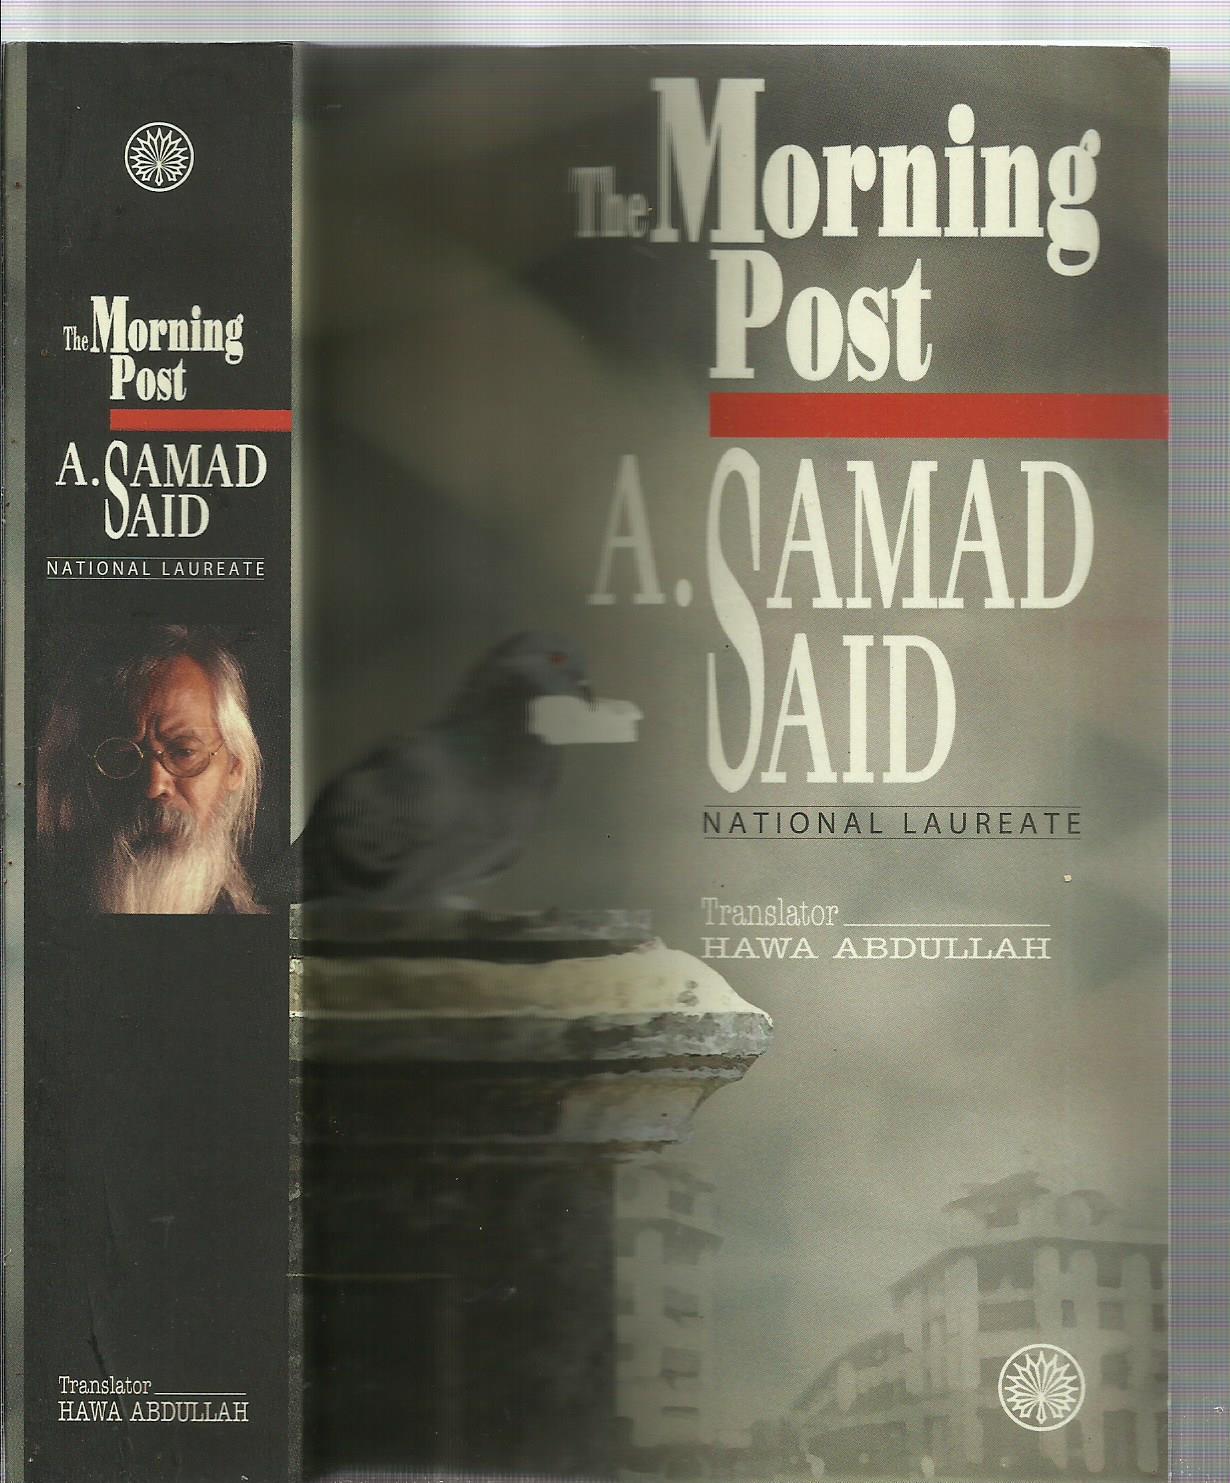 The Morning Post